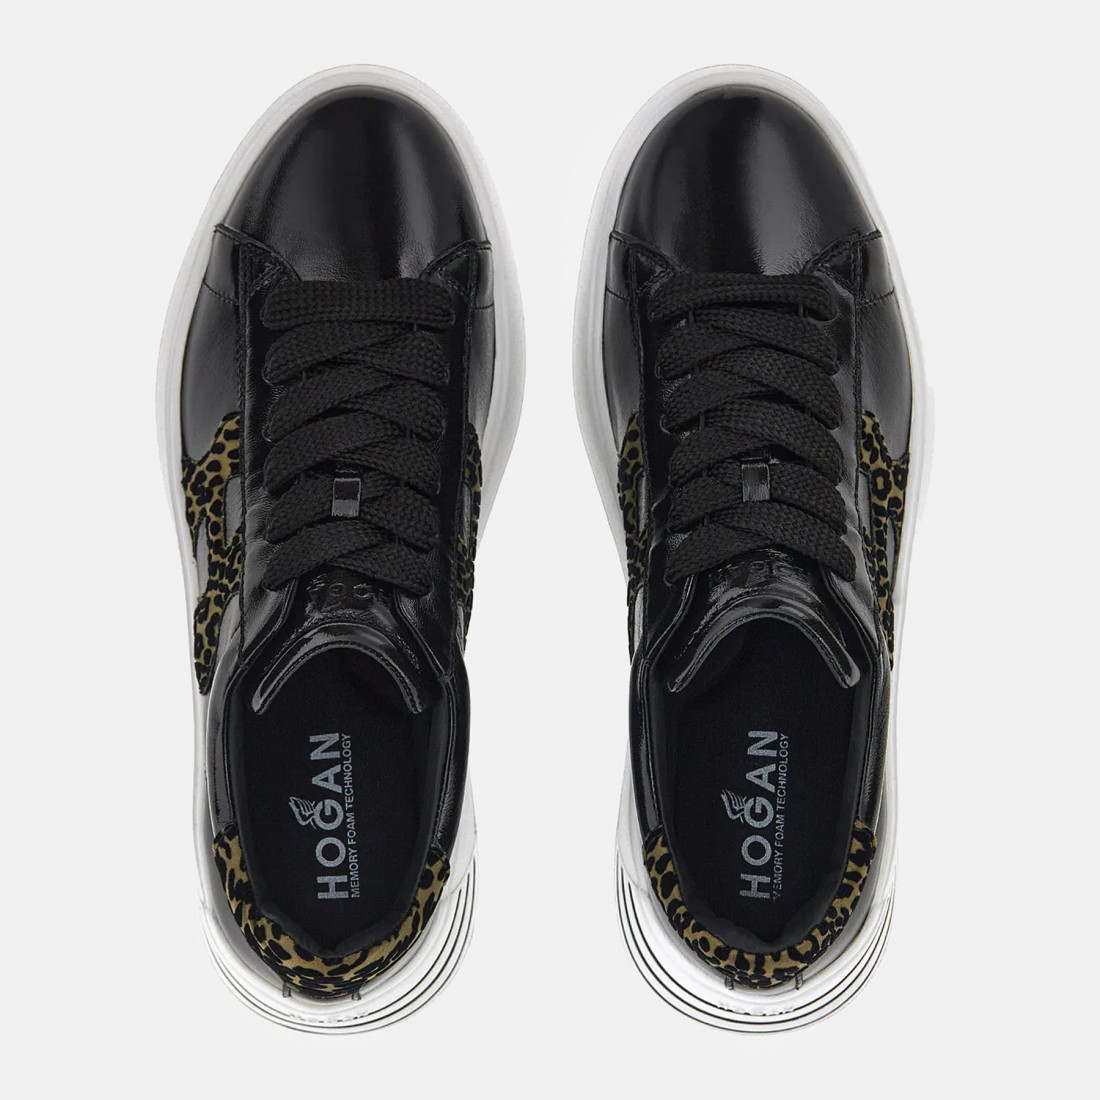 Hogan Rebel H564 black sneaker in patent leather with leopard details